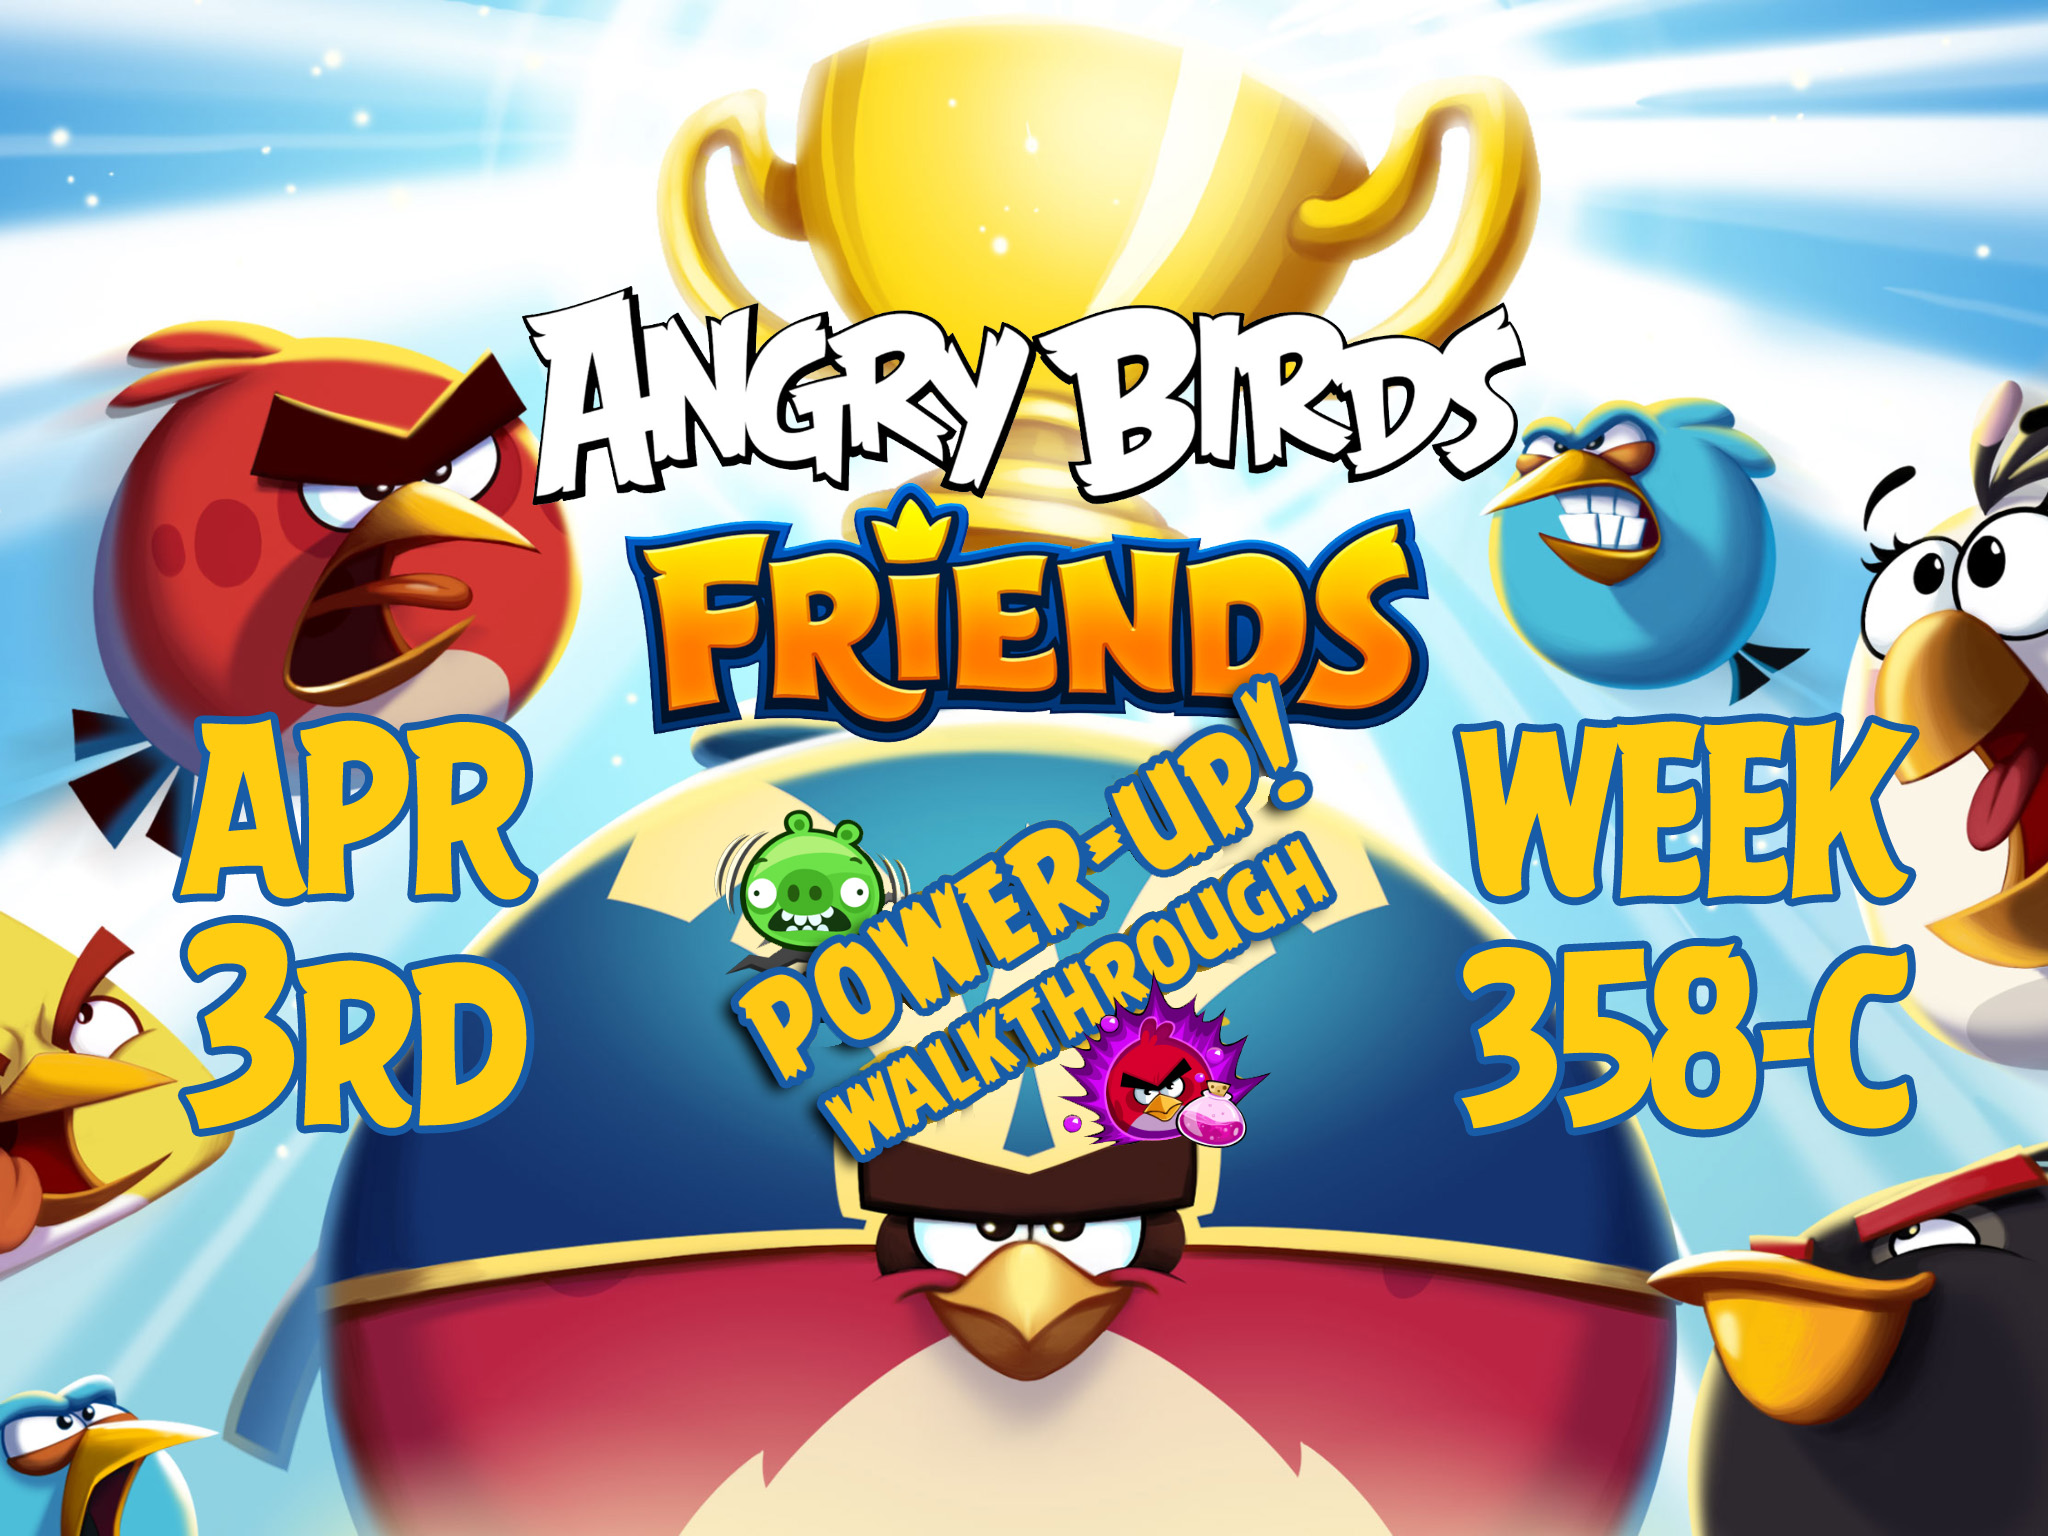 Angry-Birds-Friends-Tournament-Week-358-C-Feature-Image-PU